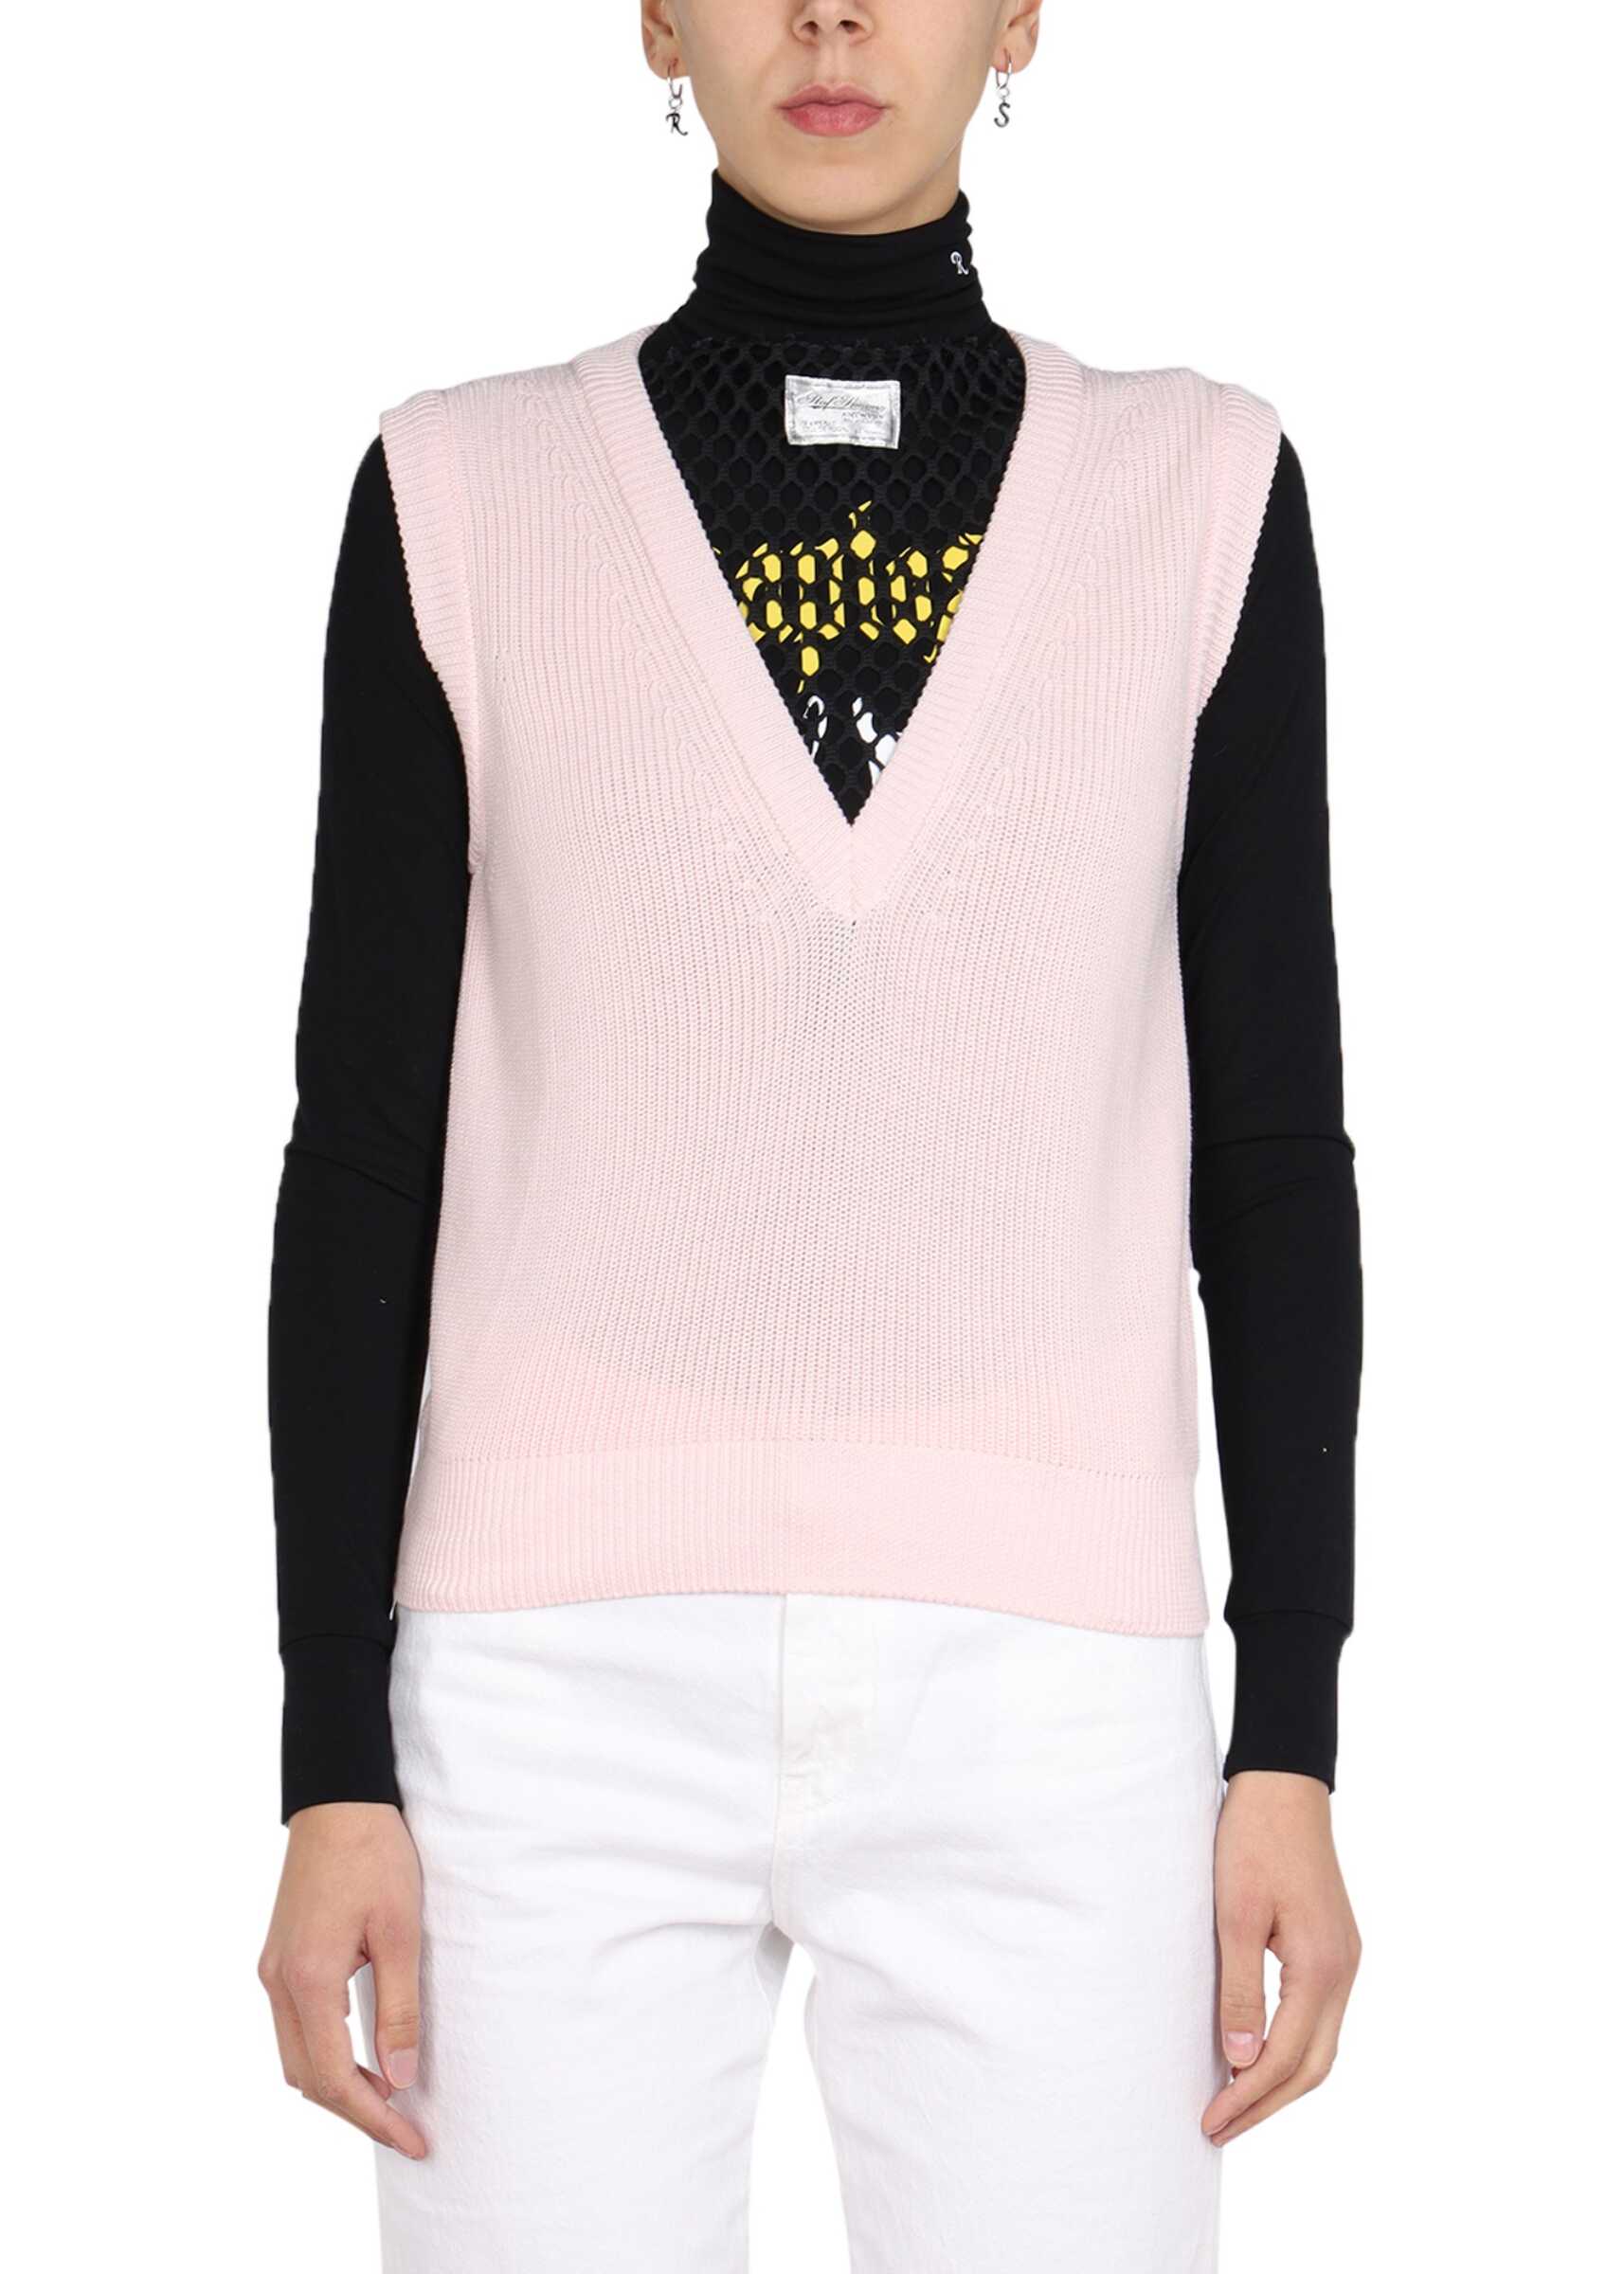 Raf Simons Knitted Vest PINK